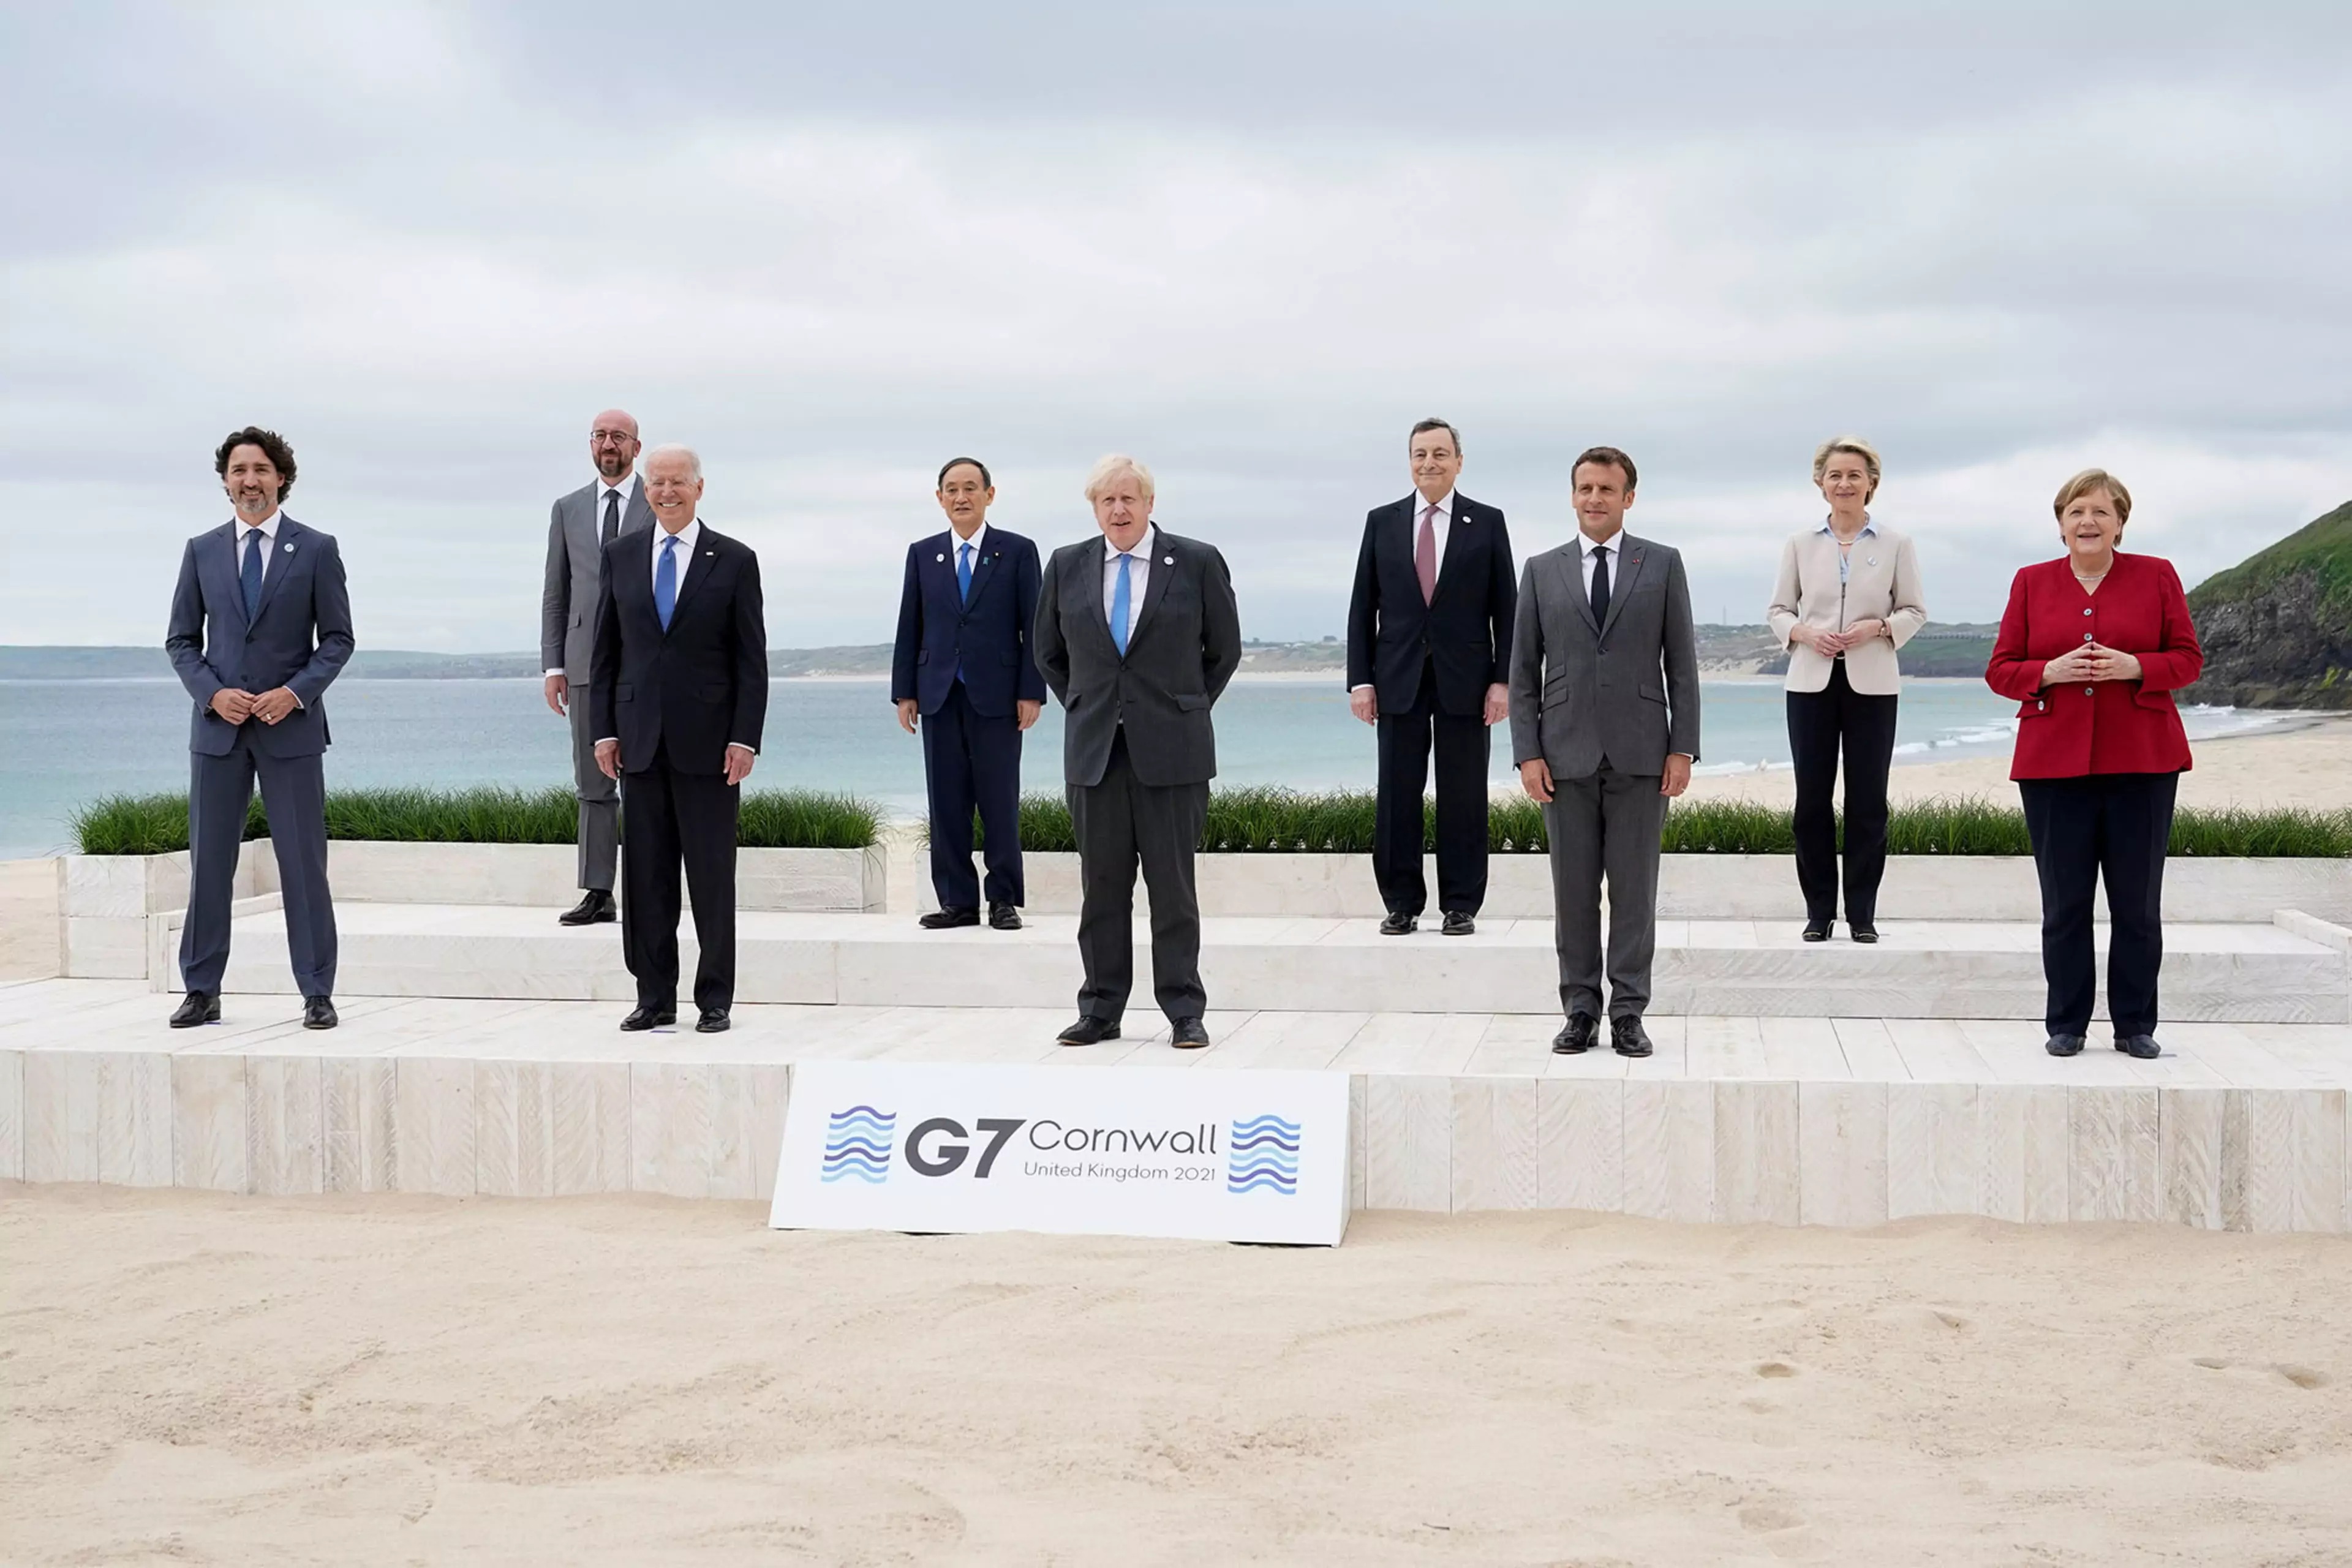 G7 leaders pose for a group photo at the June 2021 summit in Cornwall, England.